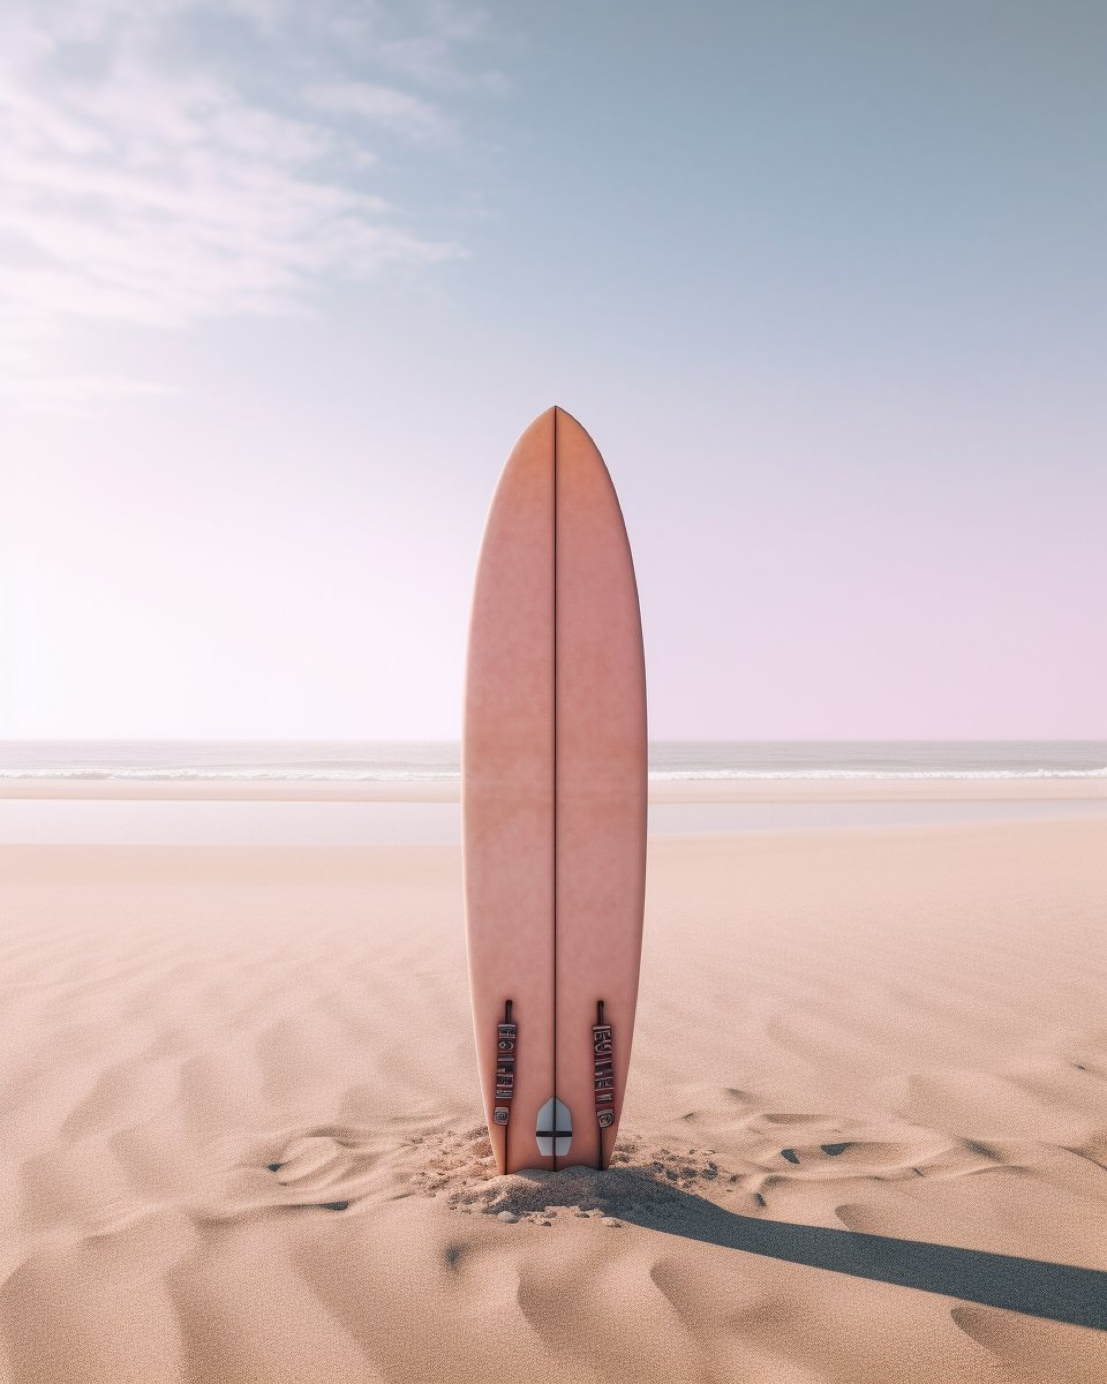 super closeup cinematic shot of shortboard standing upright in sand at beach, empty beach, minimalism, soft pink --ar 4:5